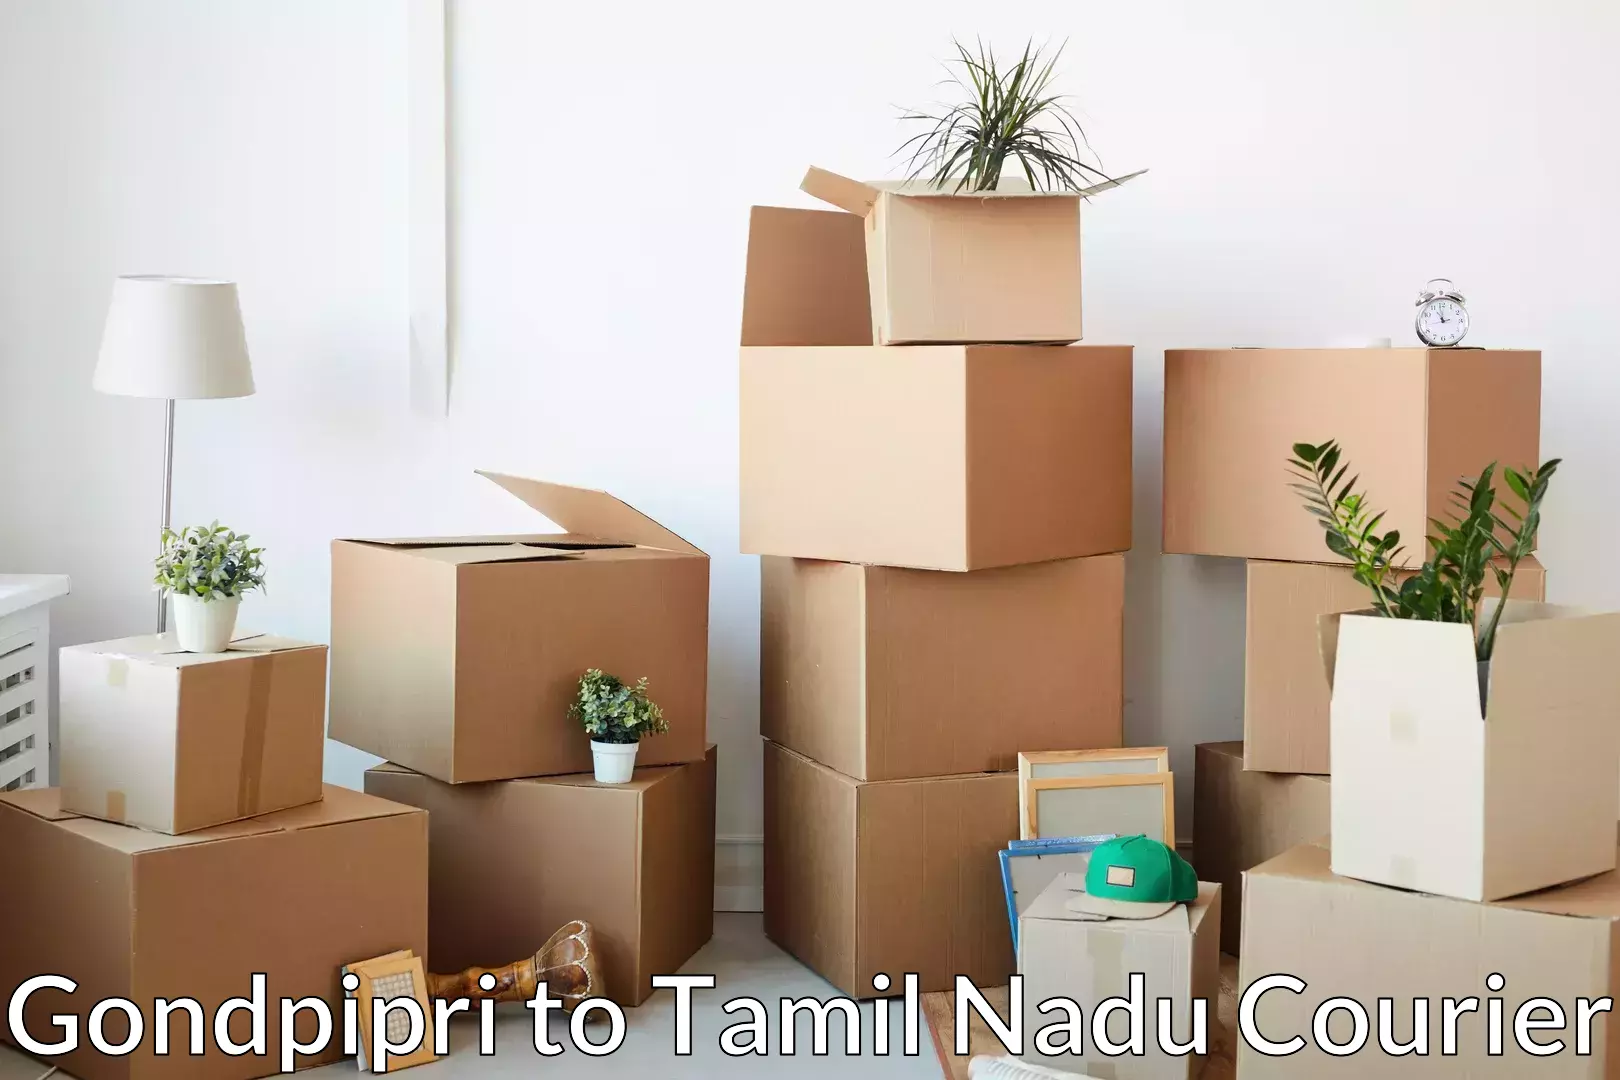 Moving and handling services in Gondpipri to Tamil Nadu